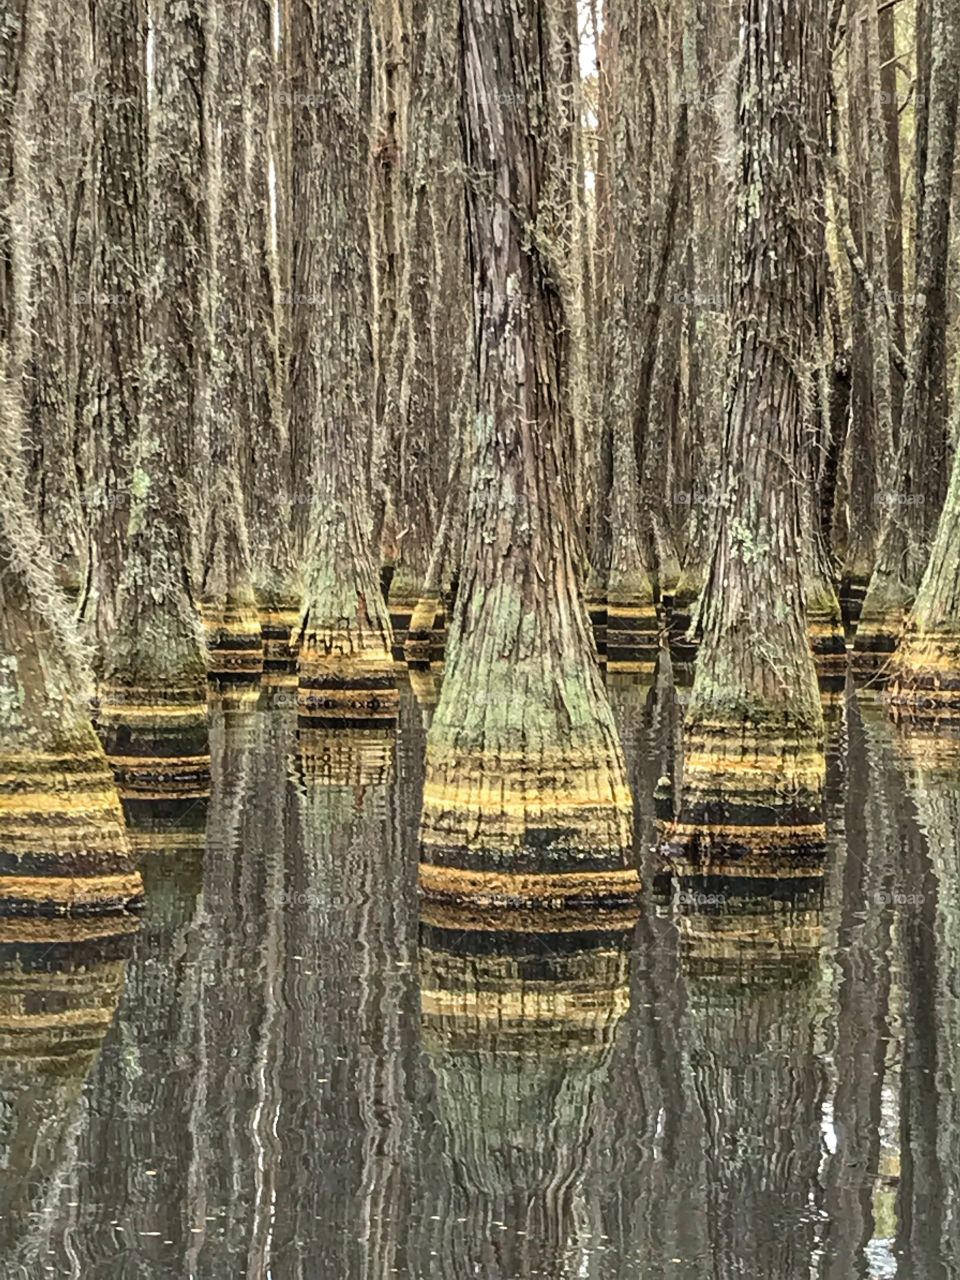 Cypress trees with pollen rings seen while kayaking lake